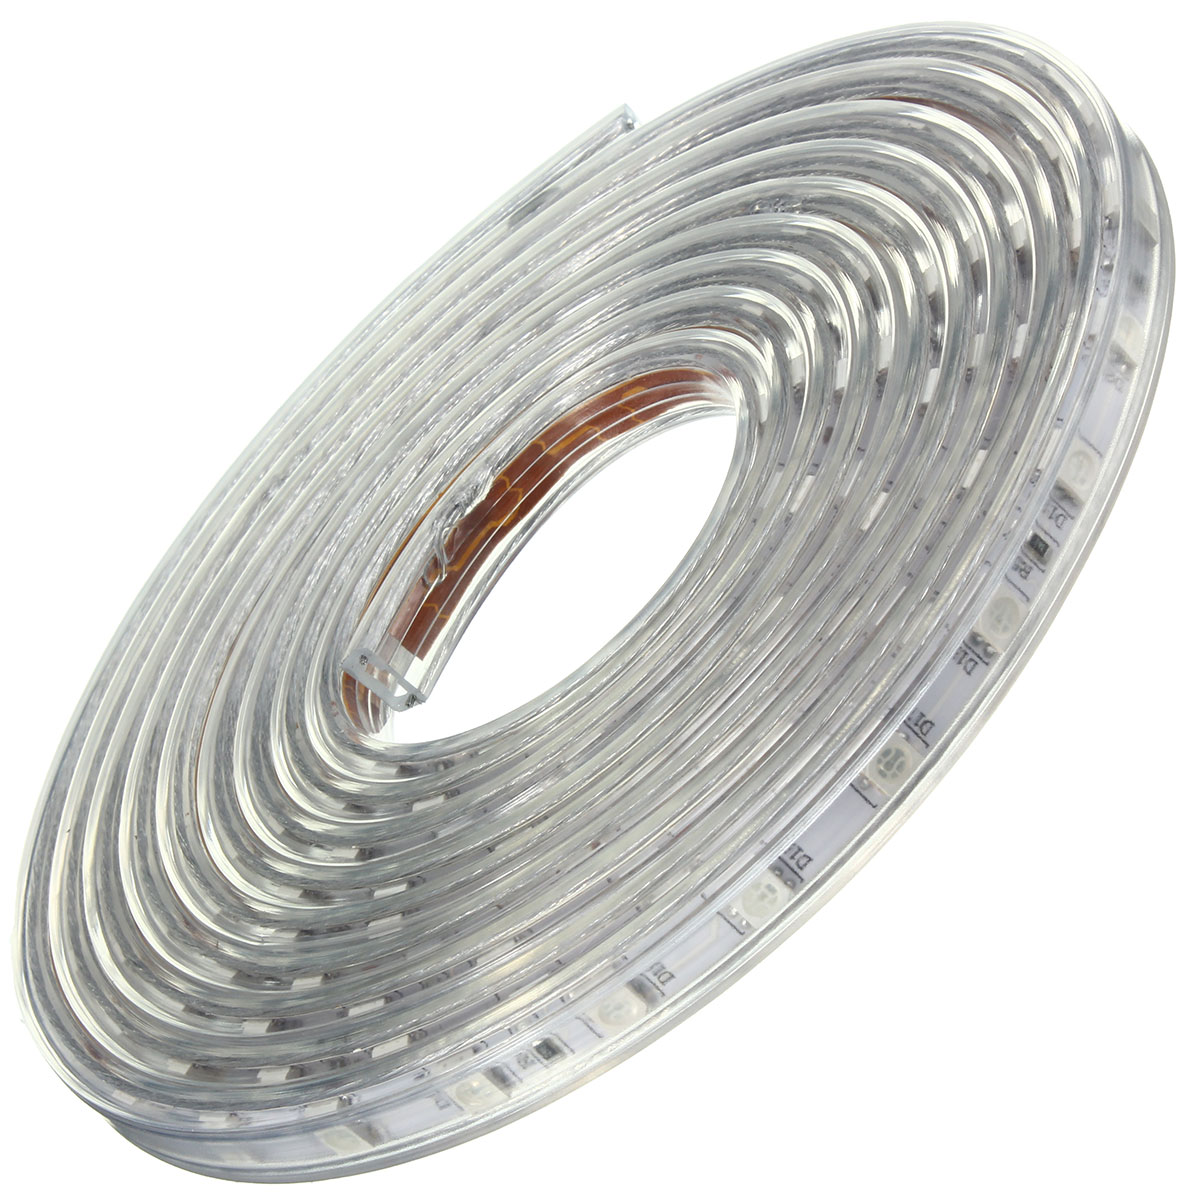 4M-5050-LED-SMD-Outdoor-Waterproof-Flexible-Tape-Rope-Strip-Light-Xmas-220V-1066361-2